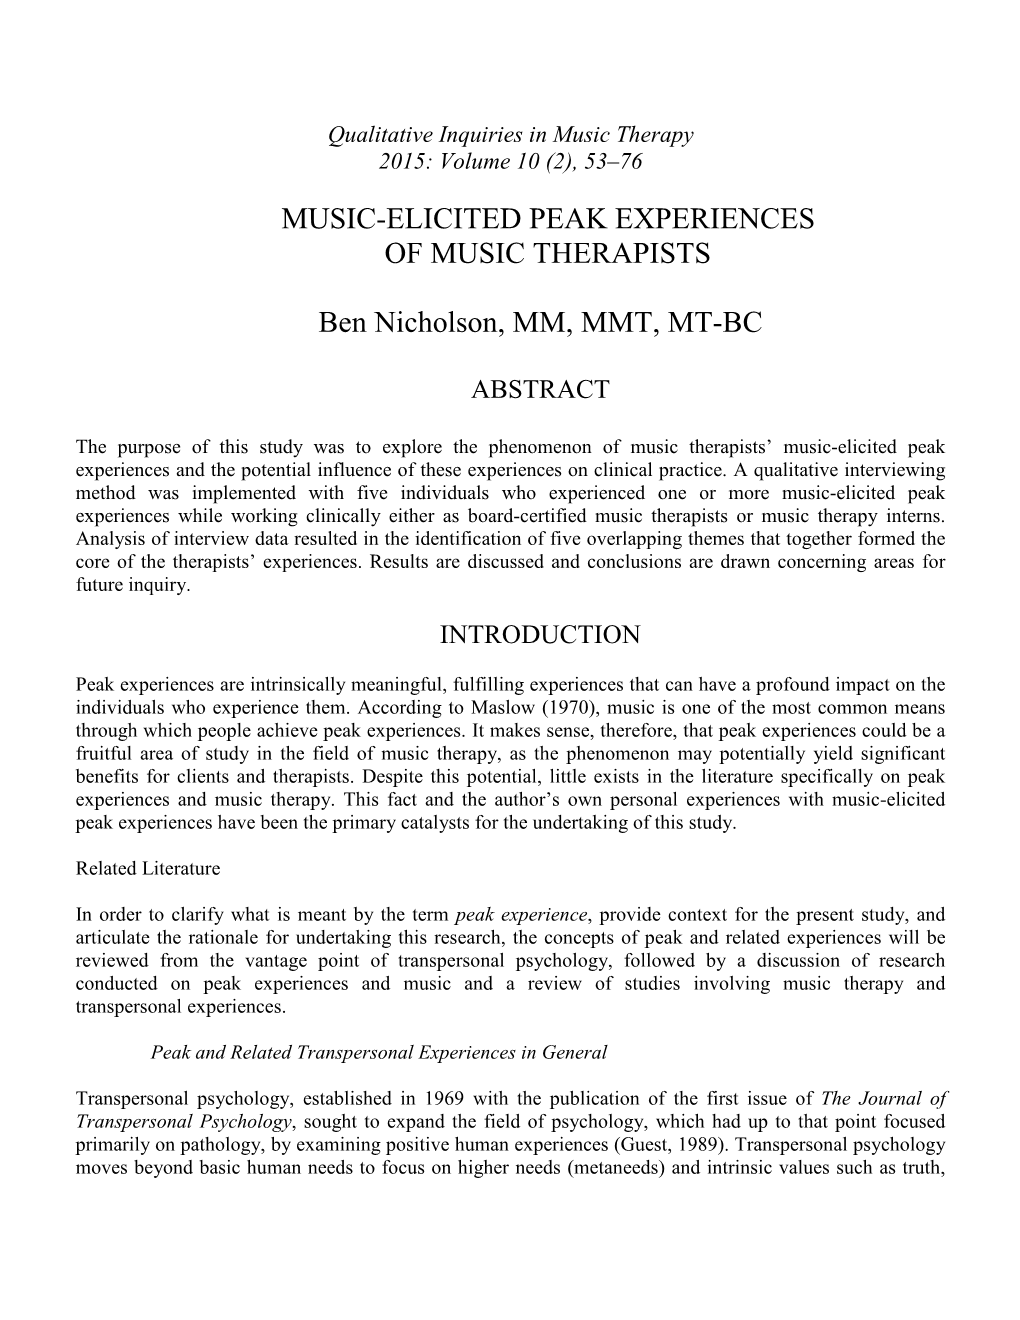 MUSIC-ELICITED PEAK EXPERIENCES of MUSIC THERAPISTS Ben Nicholson, MM, MMT, MT-BC